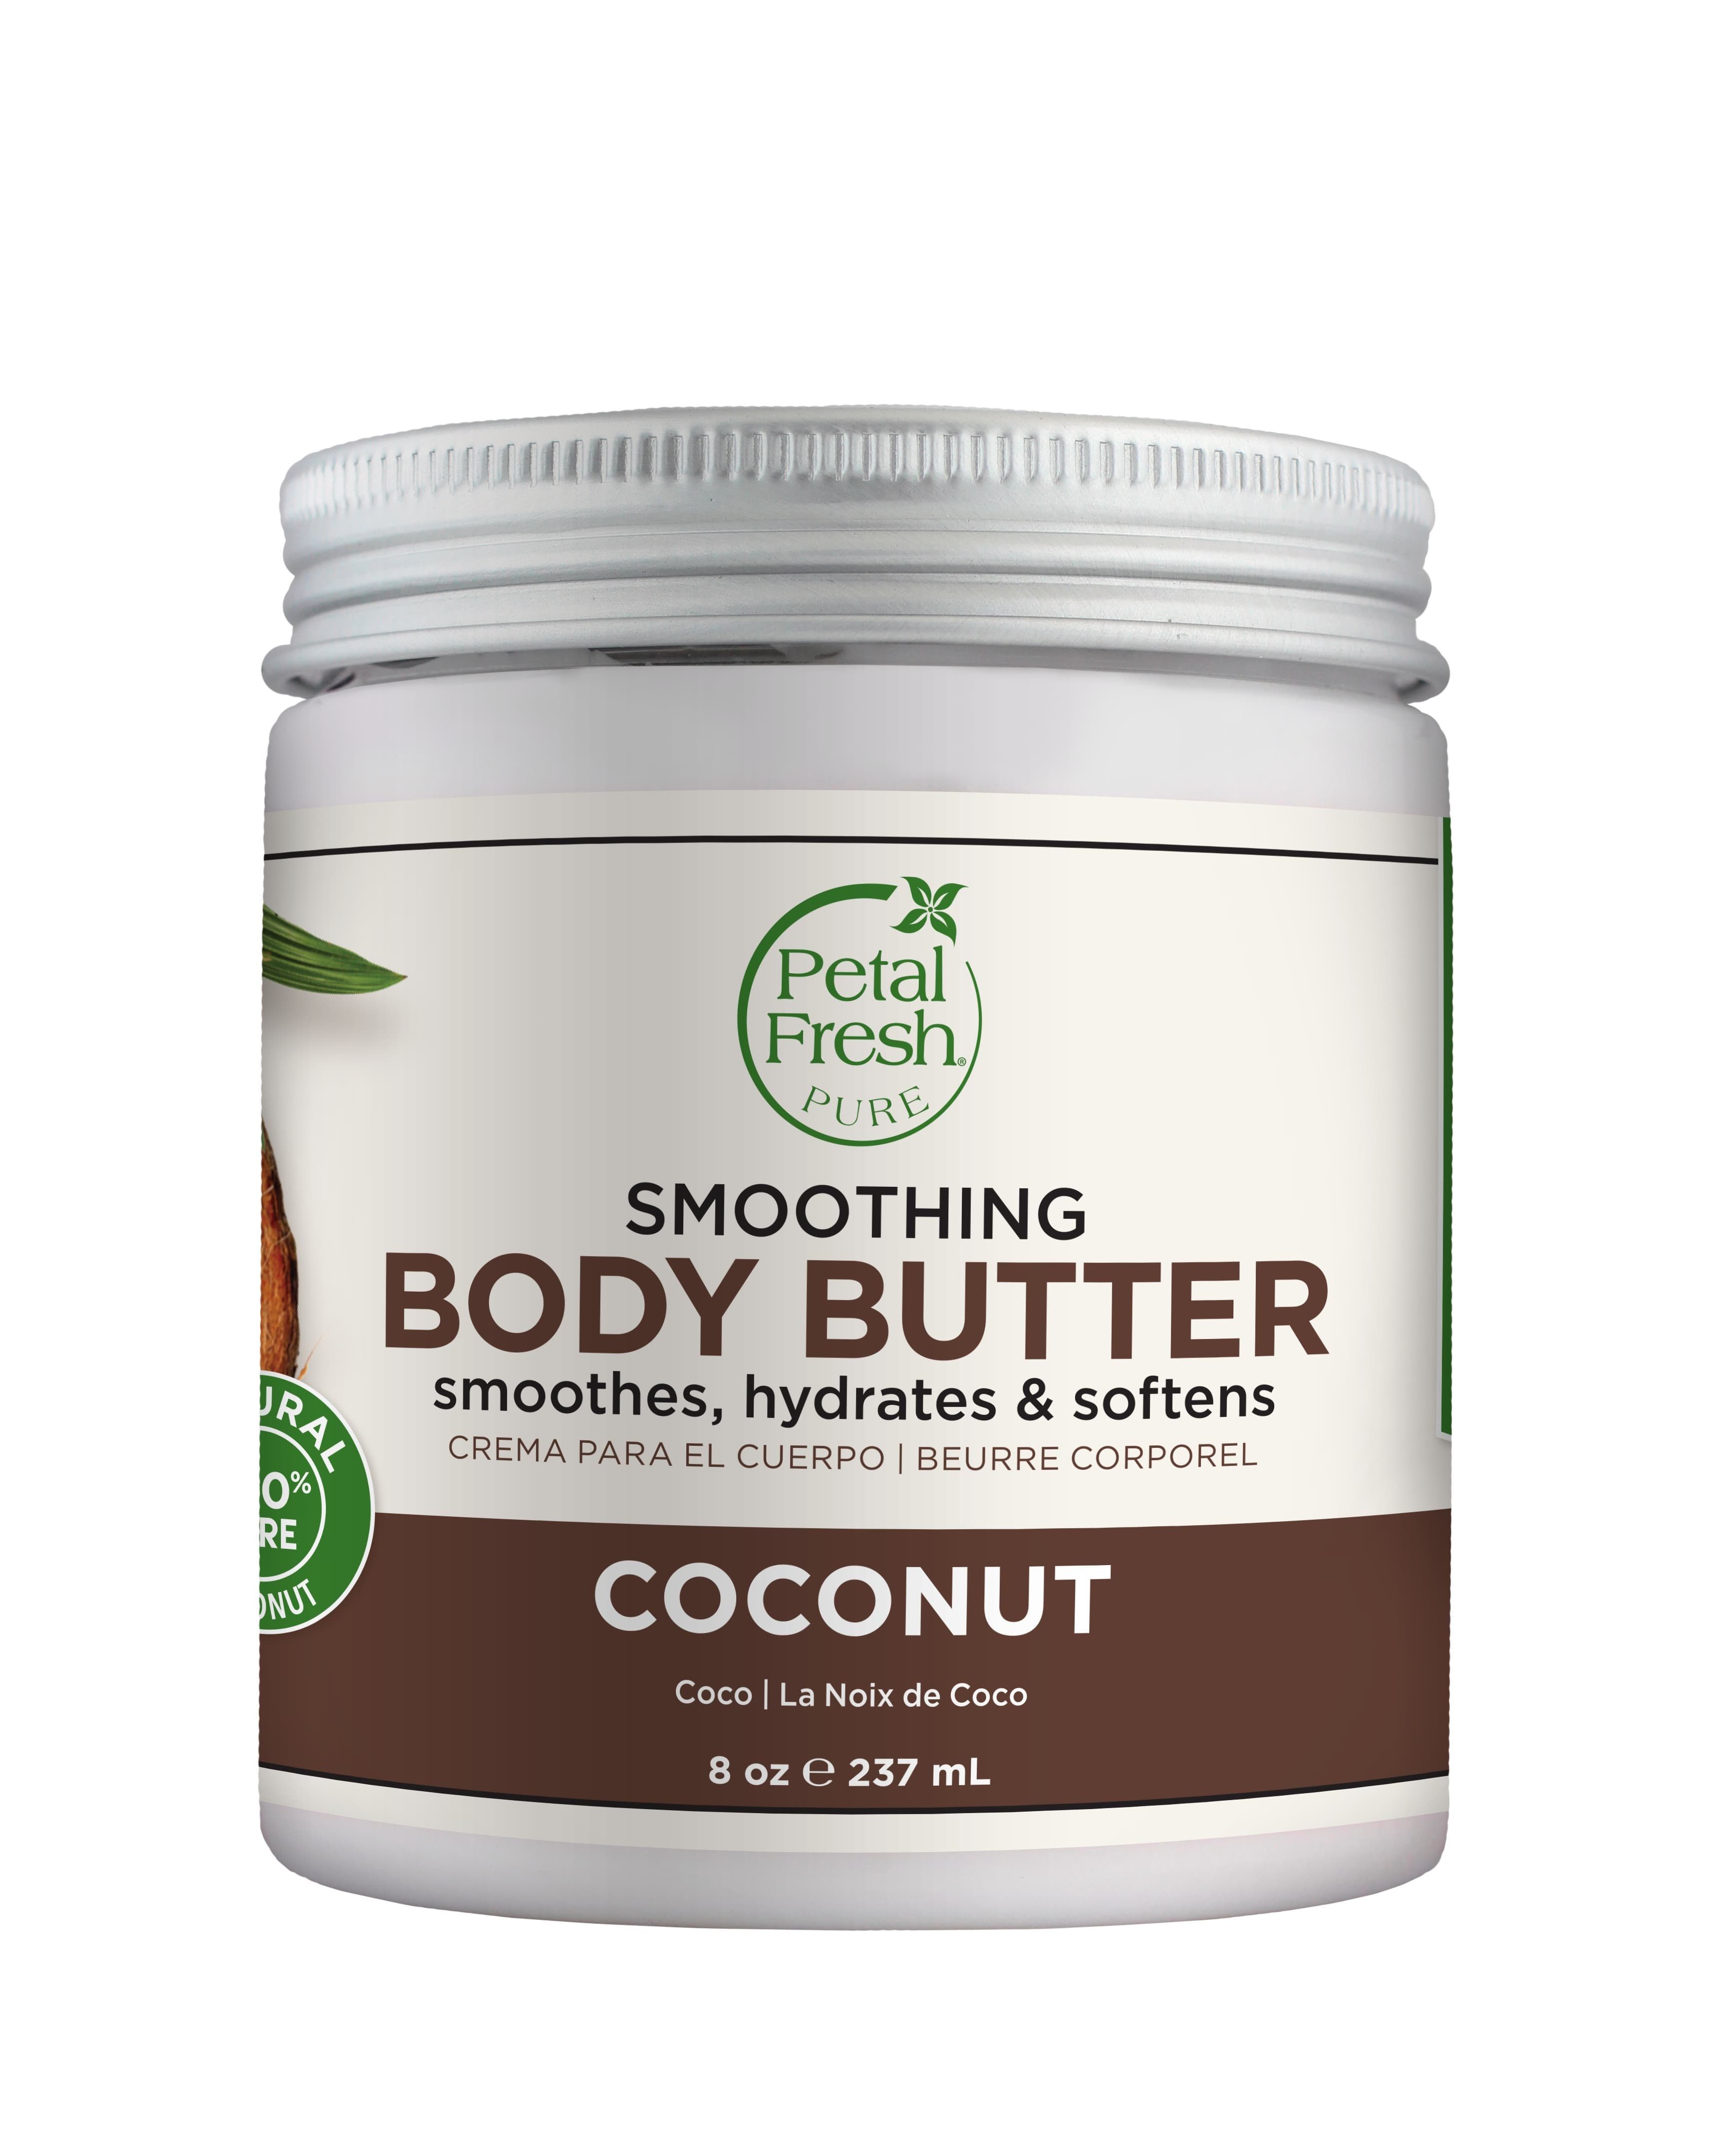 Petal Fresh Pure Coconut Smoothing Body Butter